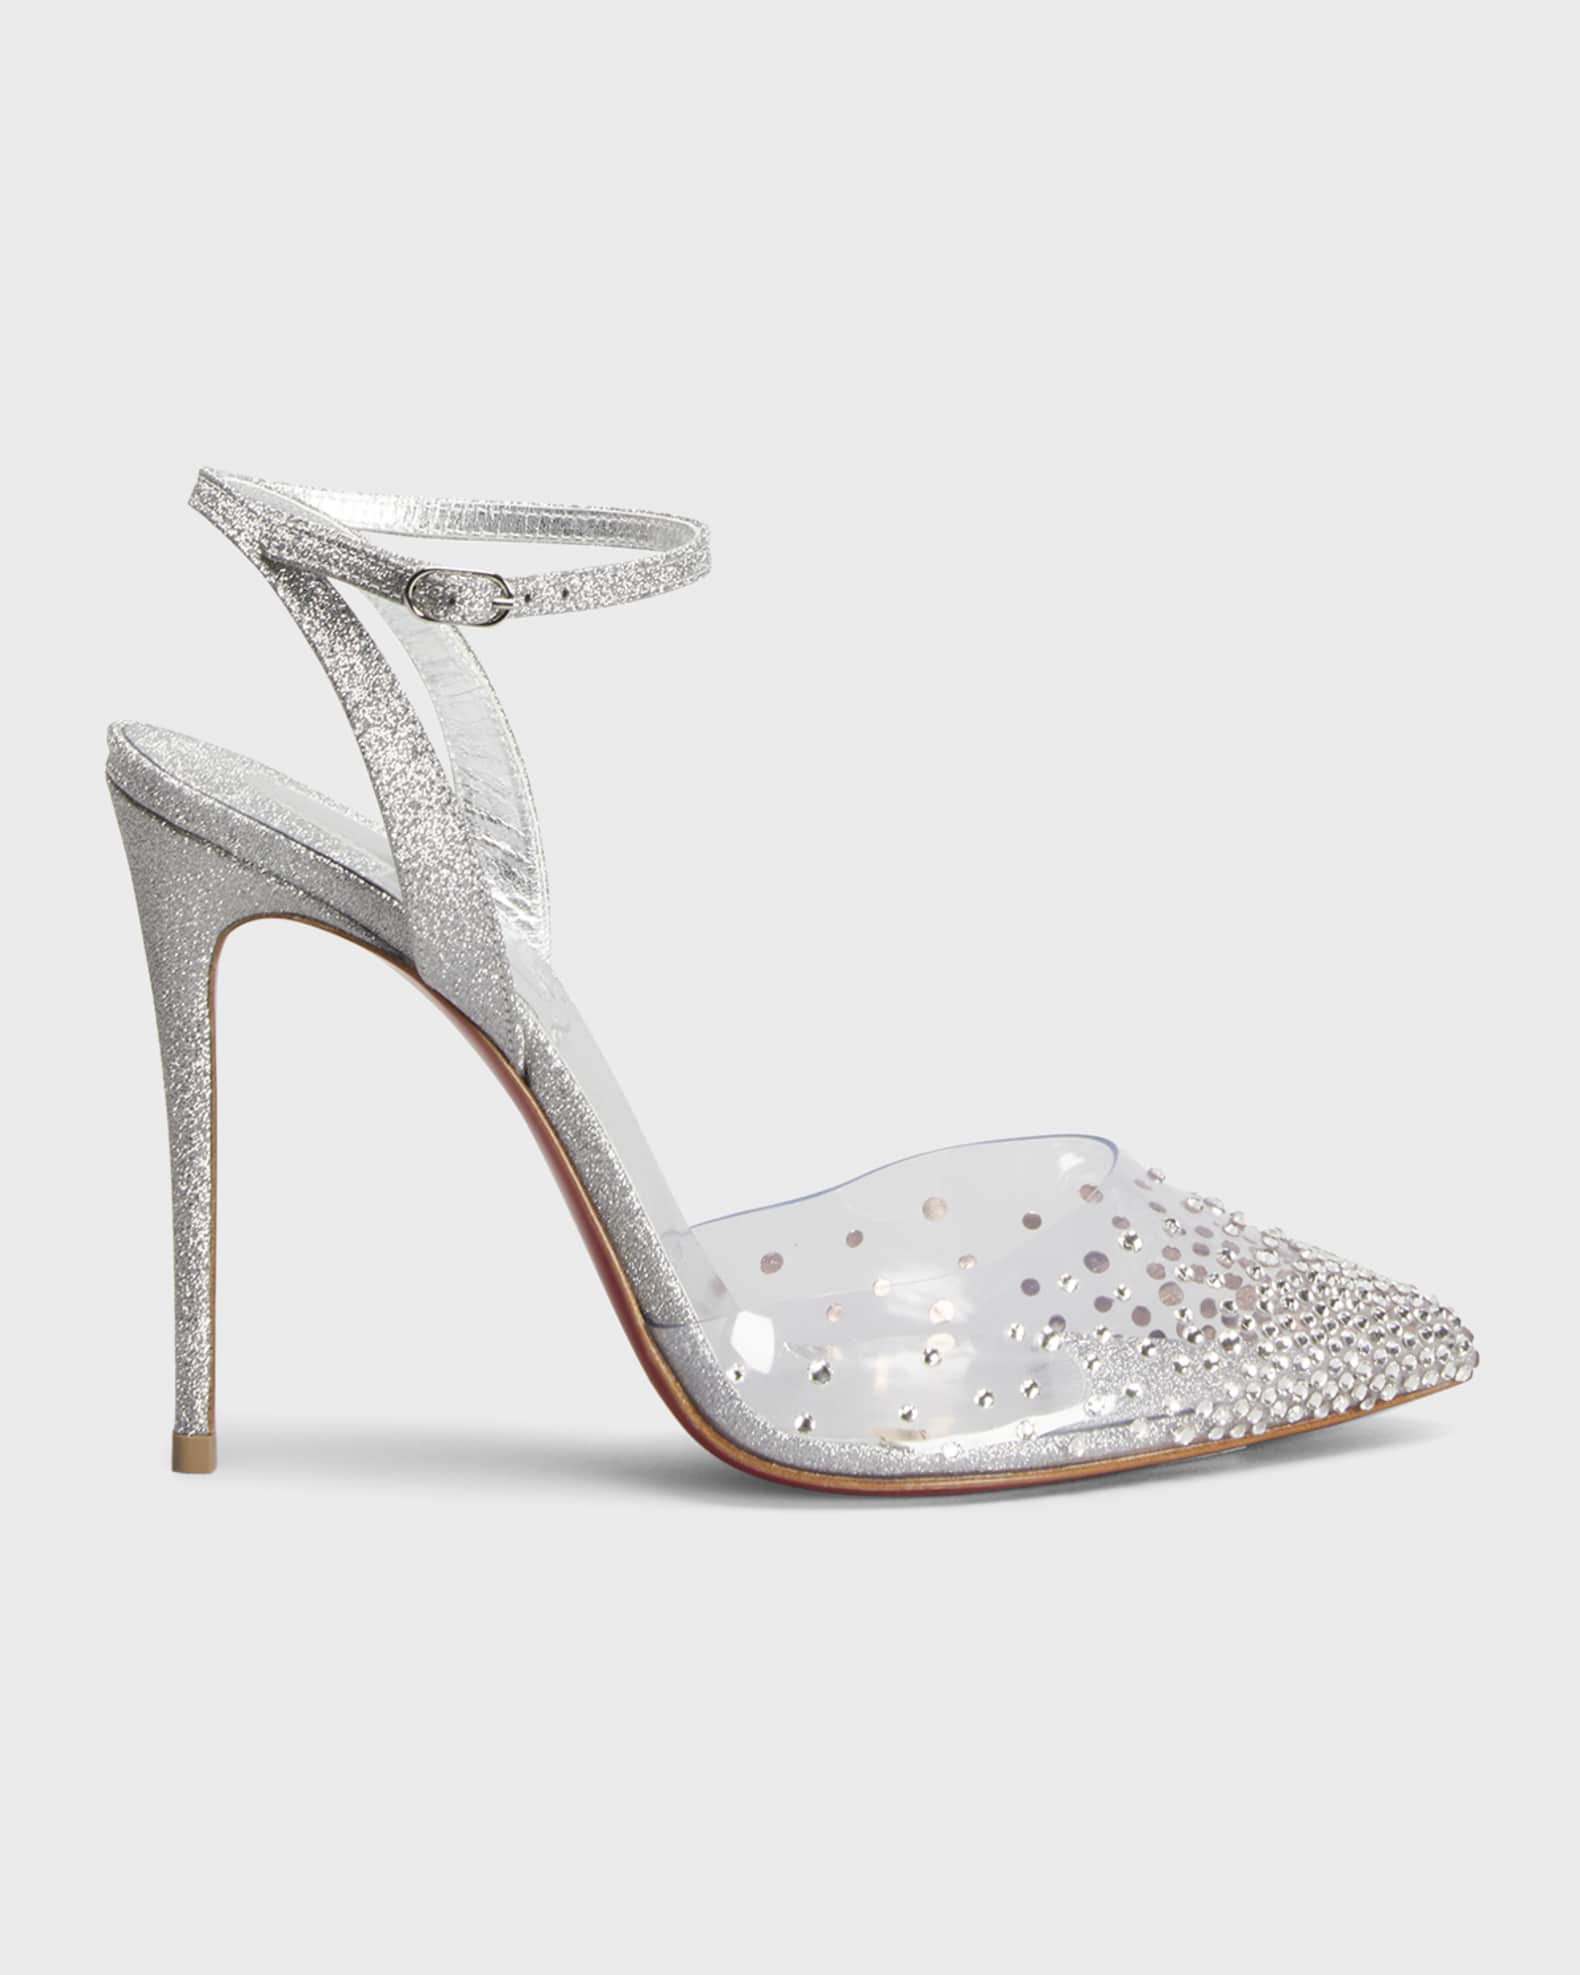 Christian Louboutin Strass Crystal Shoes 38 Size 5 Wedding Shoes